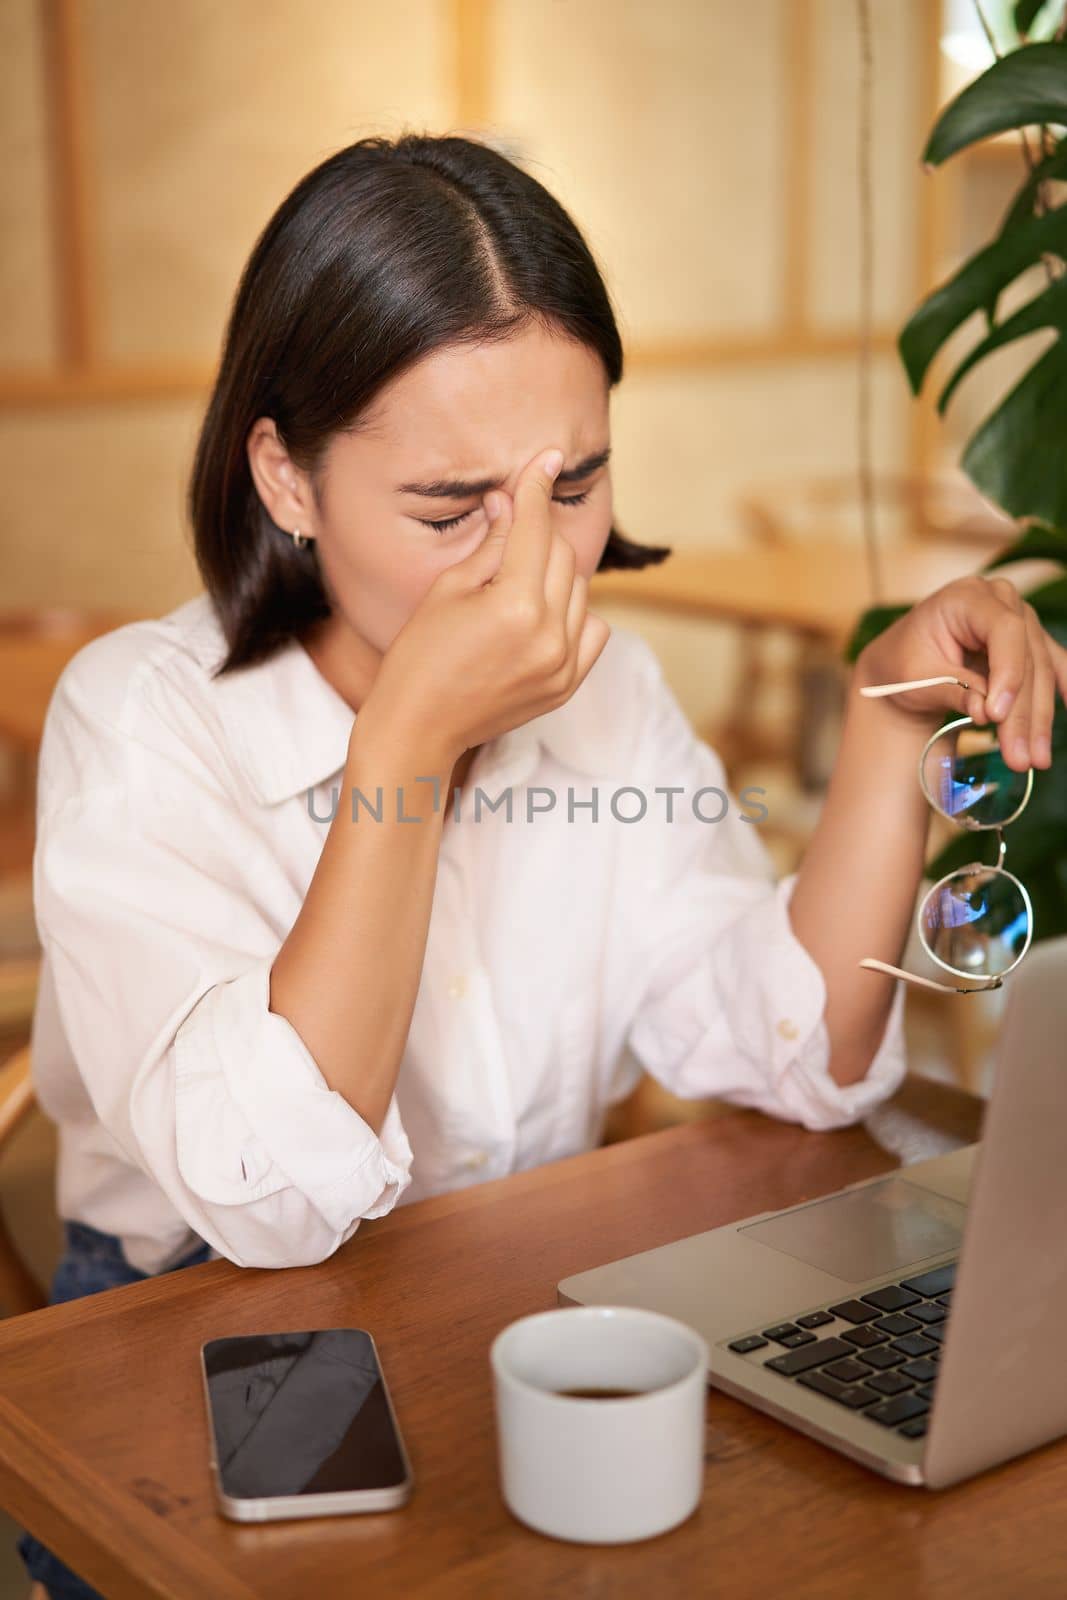 Working woman feeling tired, rubbing eyes after using laptop, having fatigue, sitting in cafe with coffee.